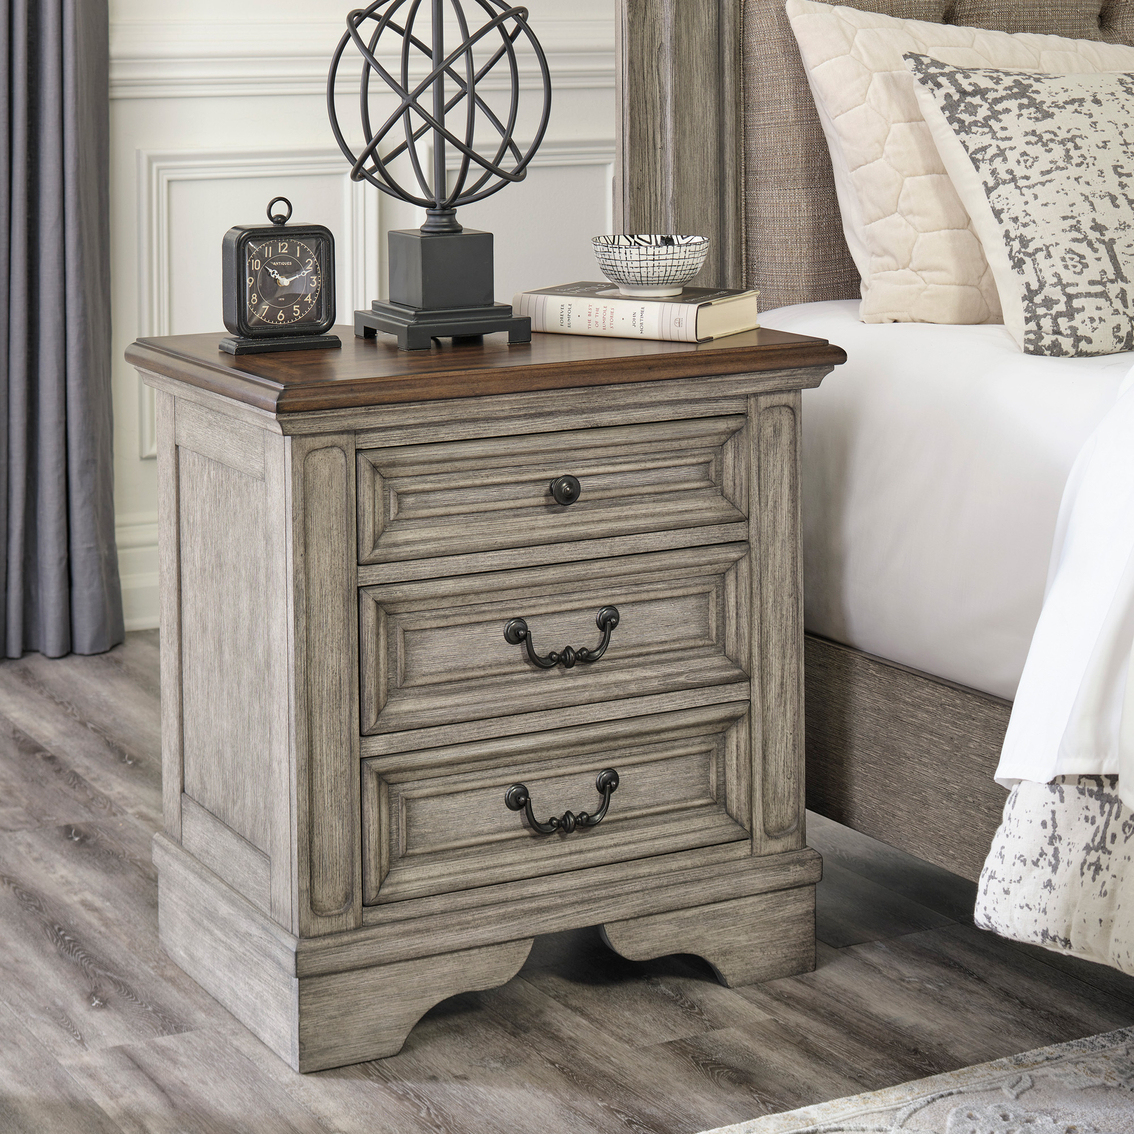 Signature Design by Ashley Bedroom Set 5 pc. - Image 5 of 10